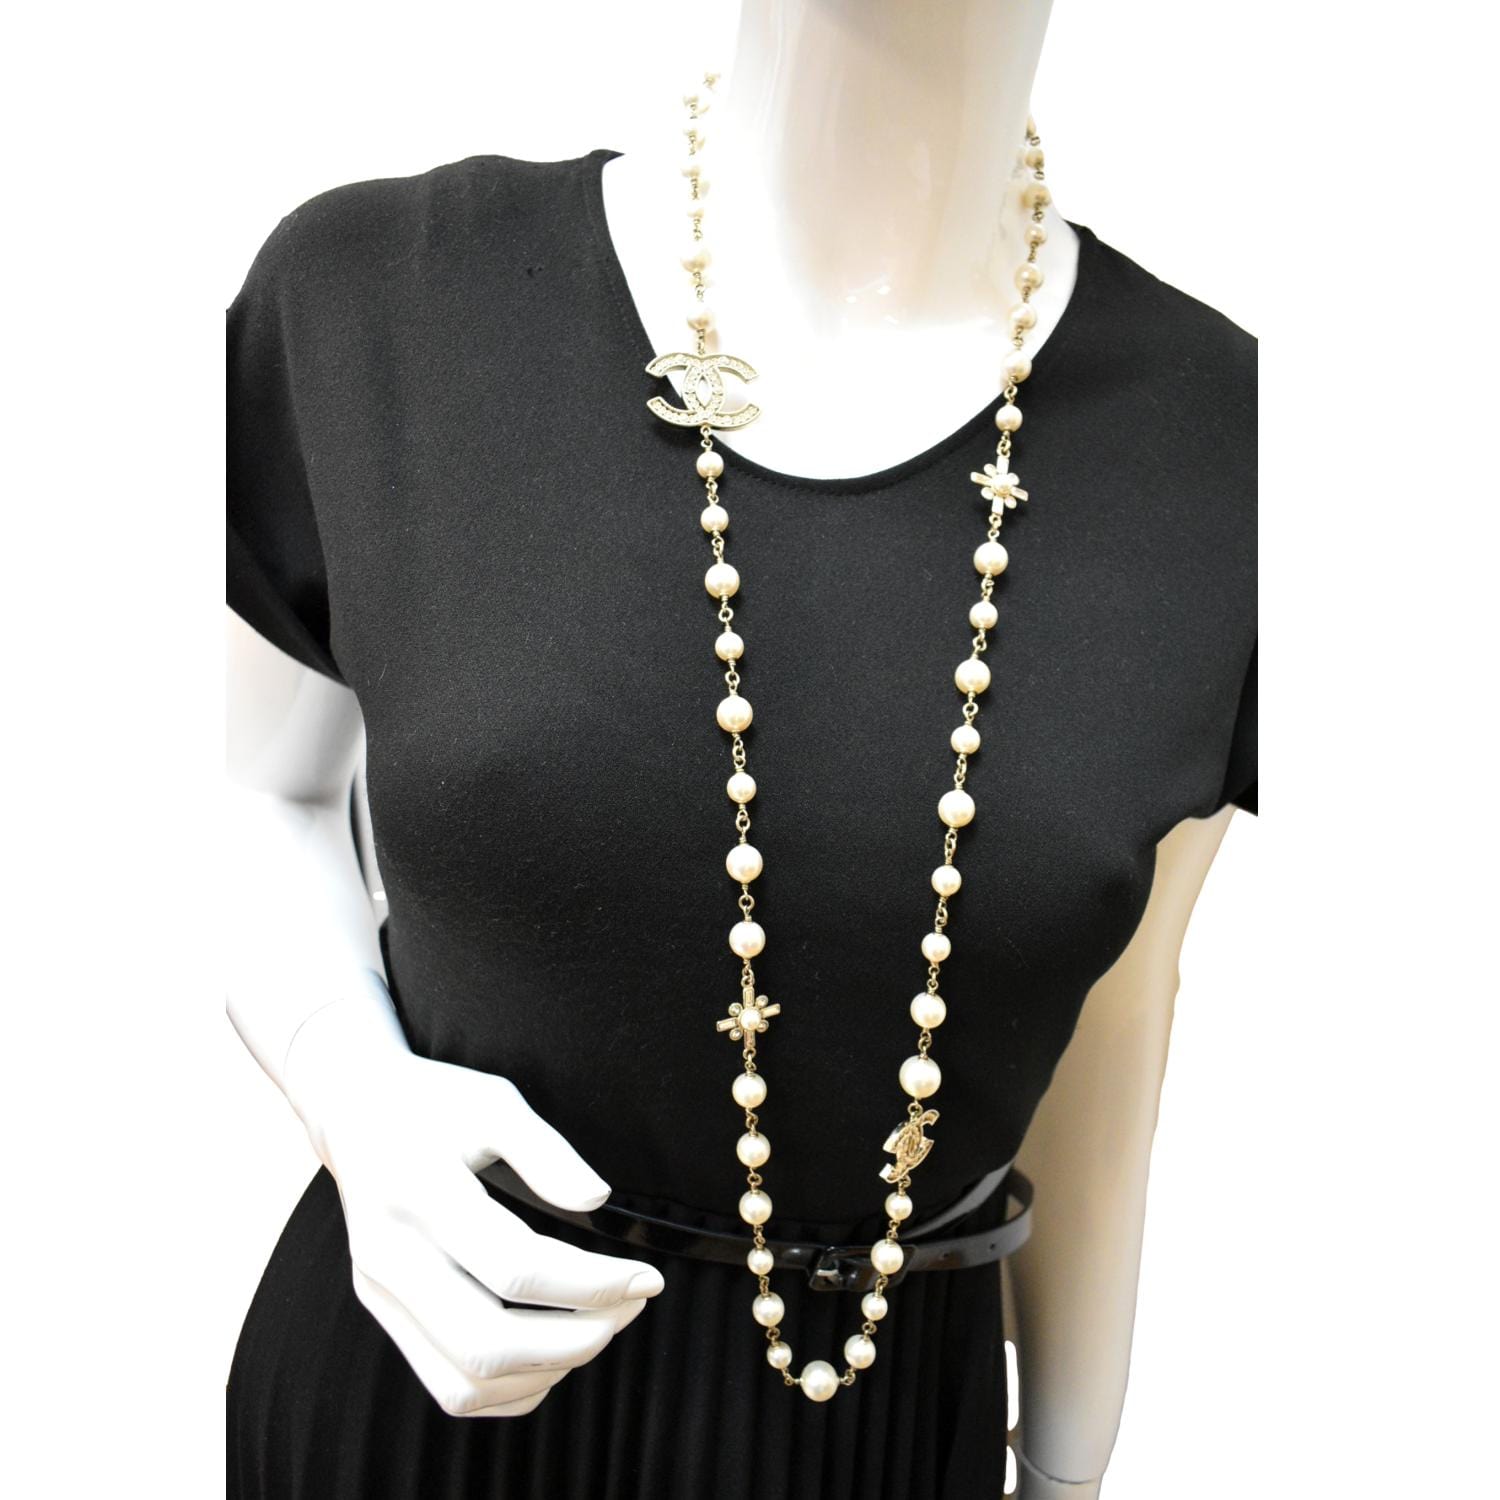 CHANEL Crystal CC Long Necklace - Sold